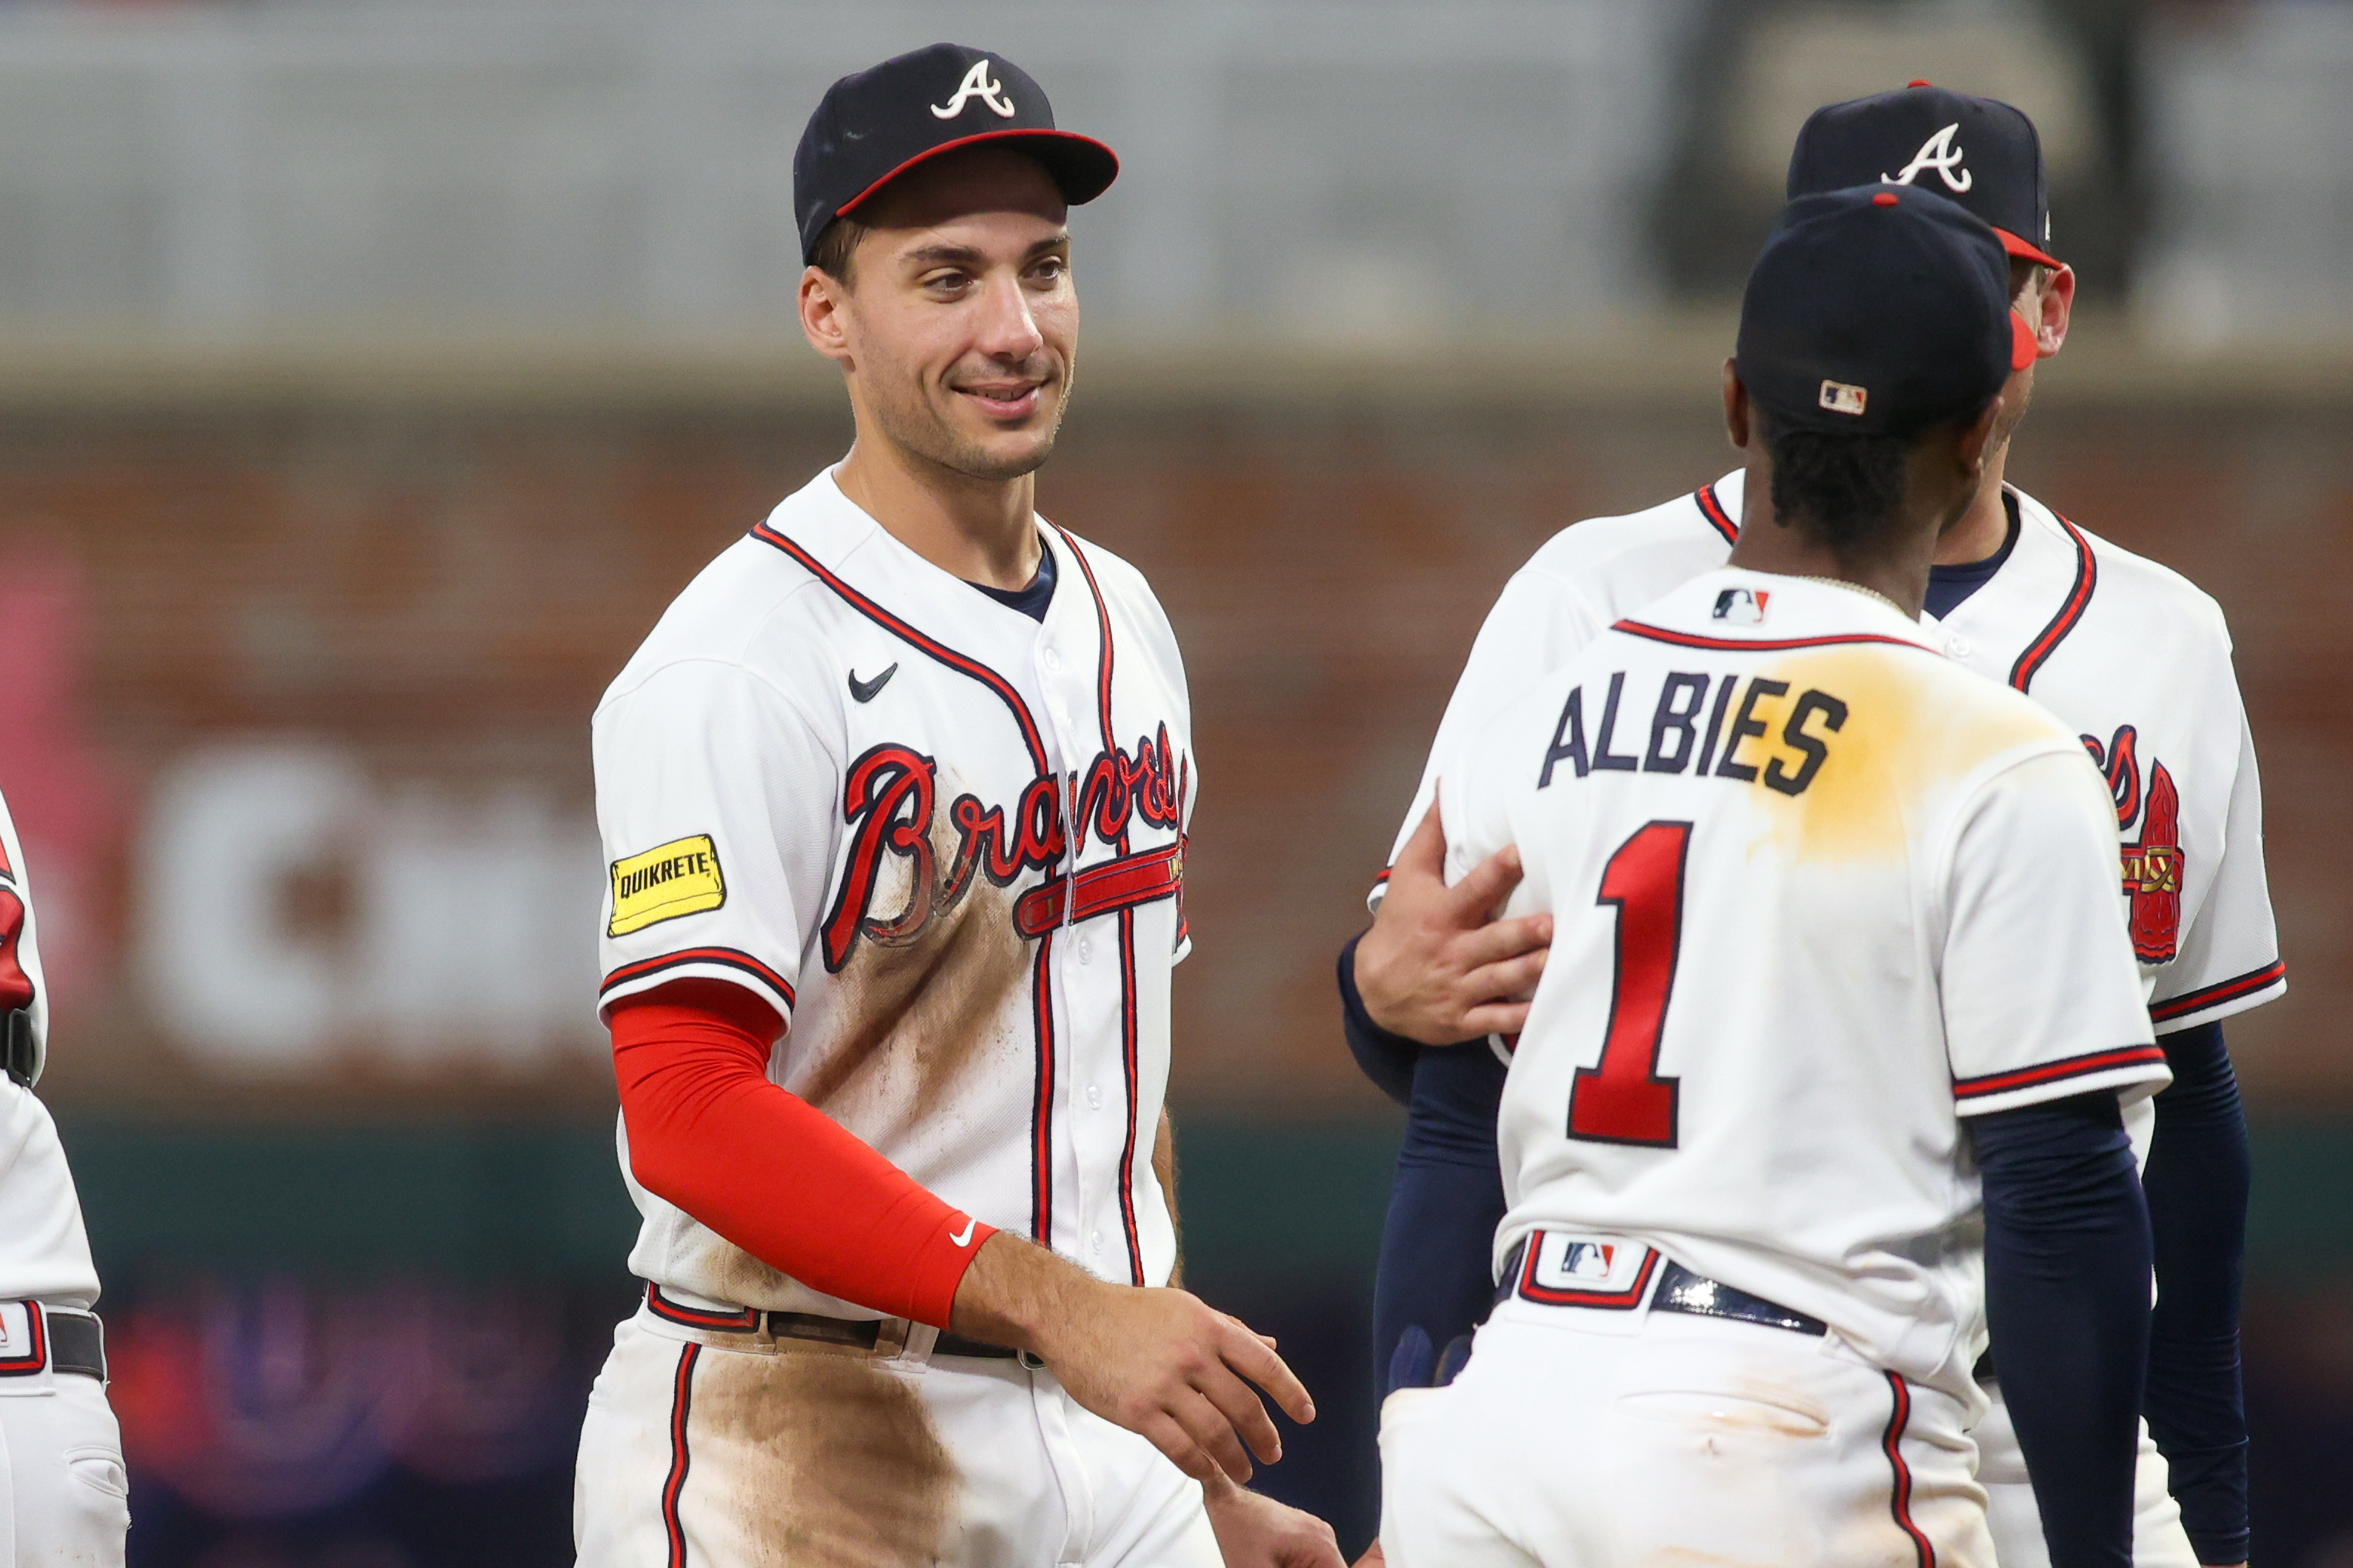 Braves beat Phillies 9-3 behind two home runs by Ronald Acuña Jr.